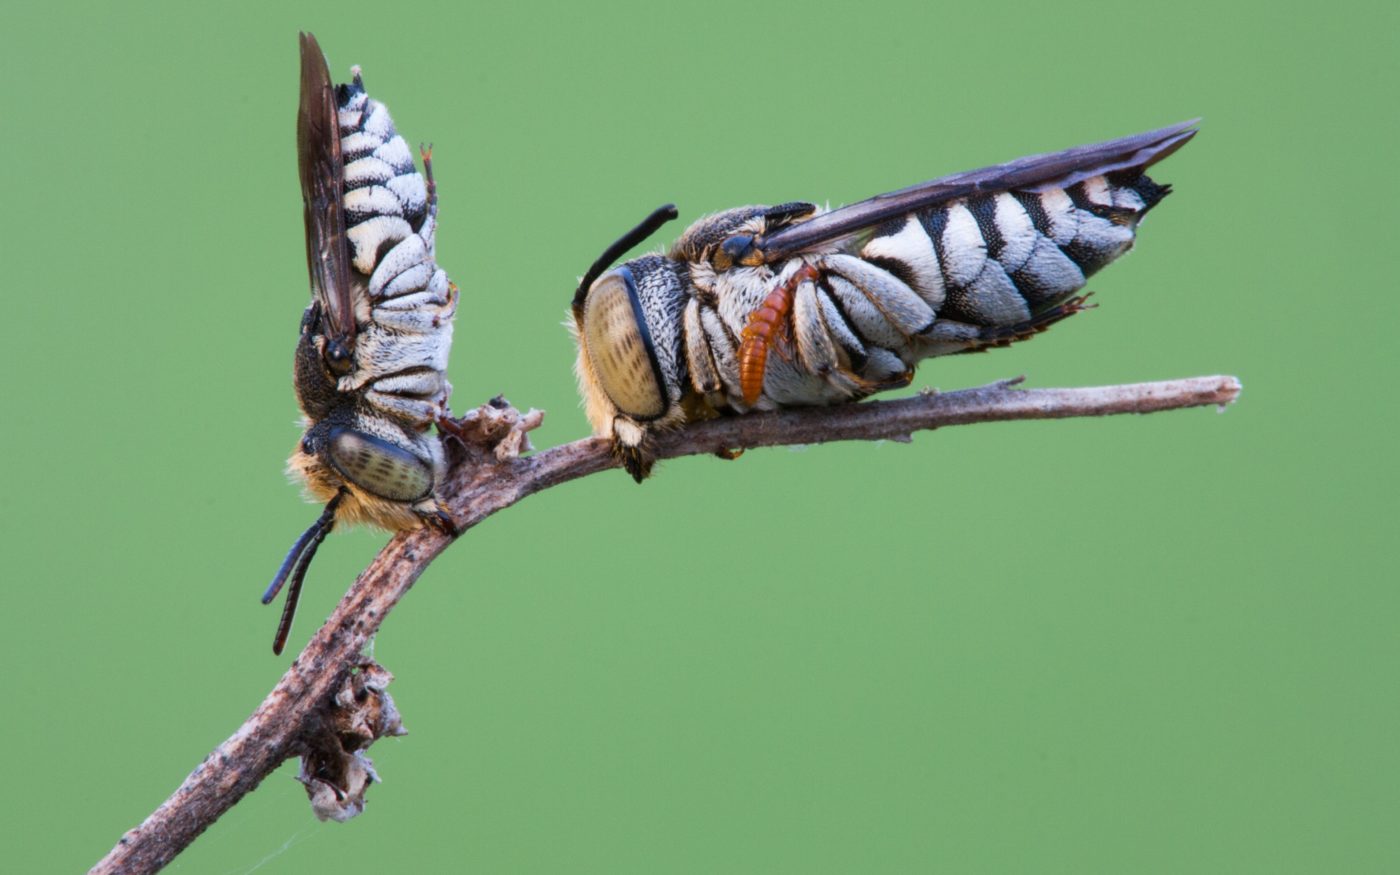 Two Cuckoo bees, Coelioxys sp., on a twig